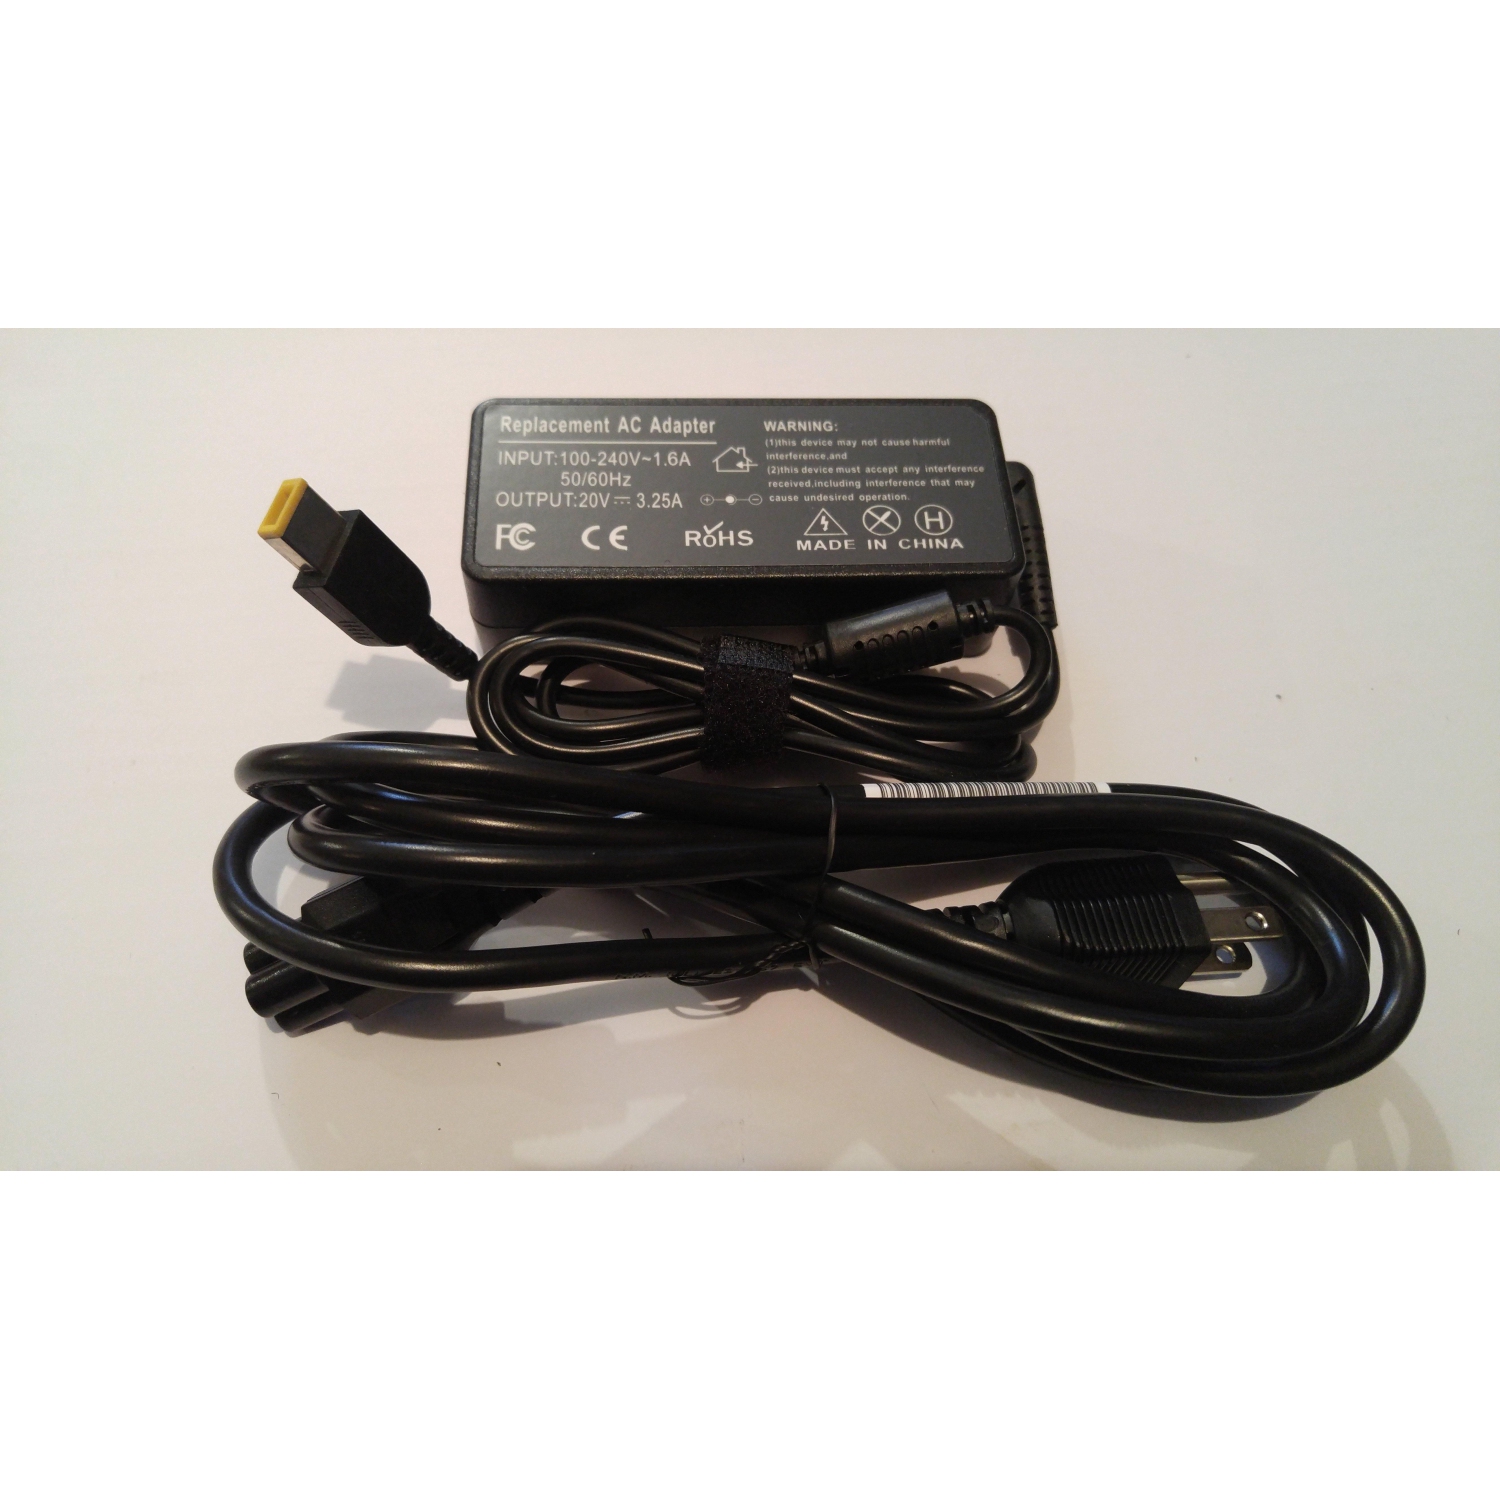 New Compatible Lenovo B40 B50 G40 G50 M5400 20C6 Ac Adapter Charger 65W